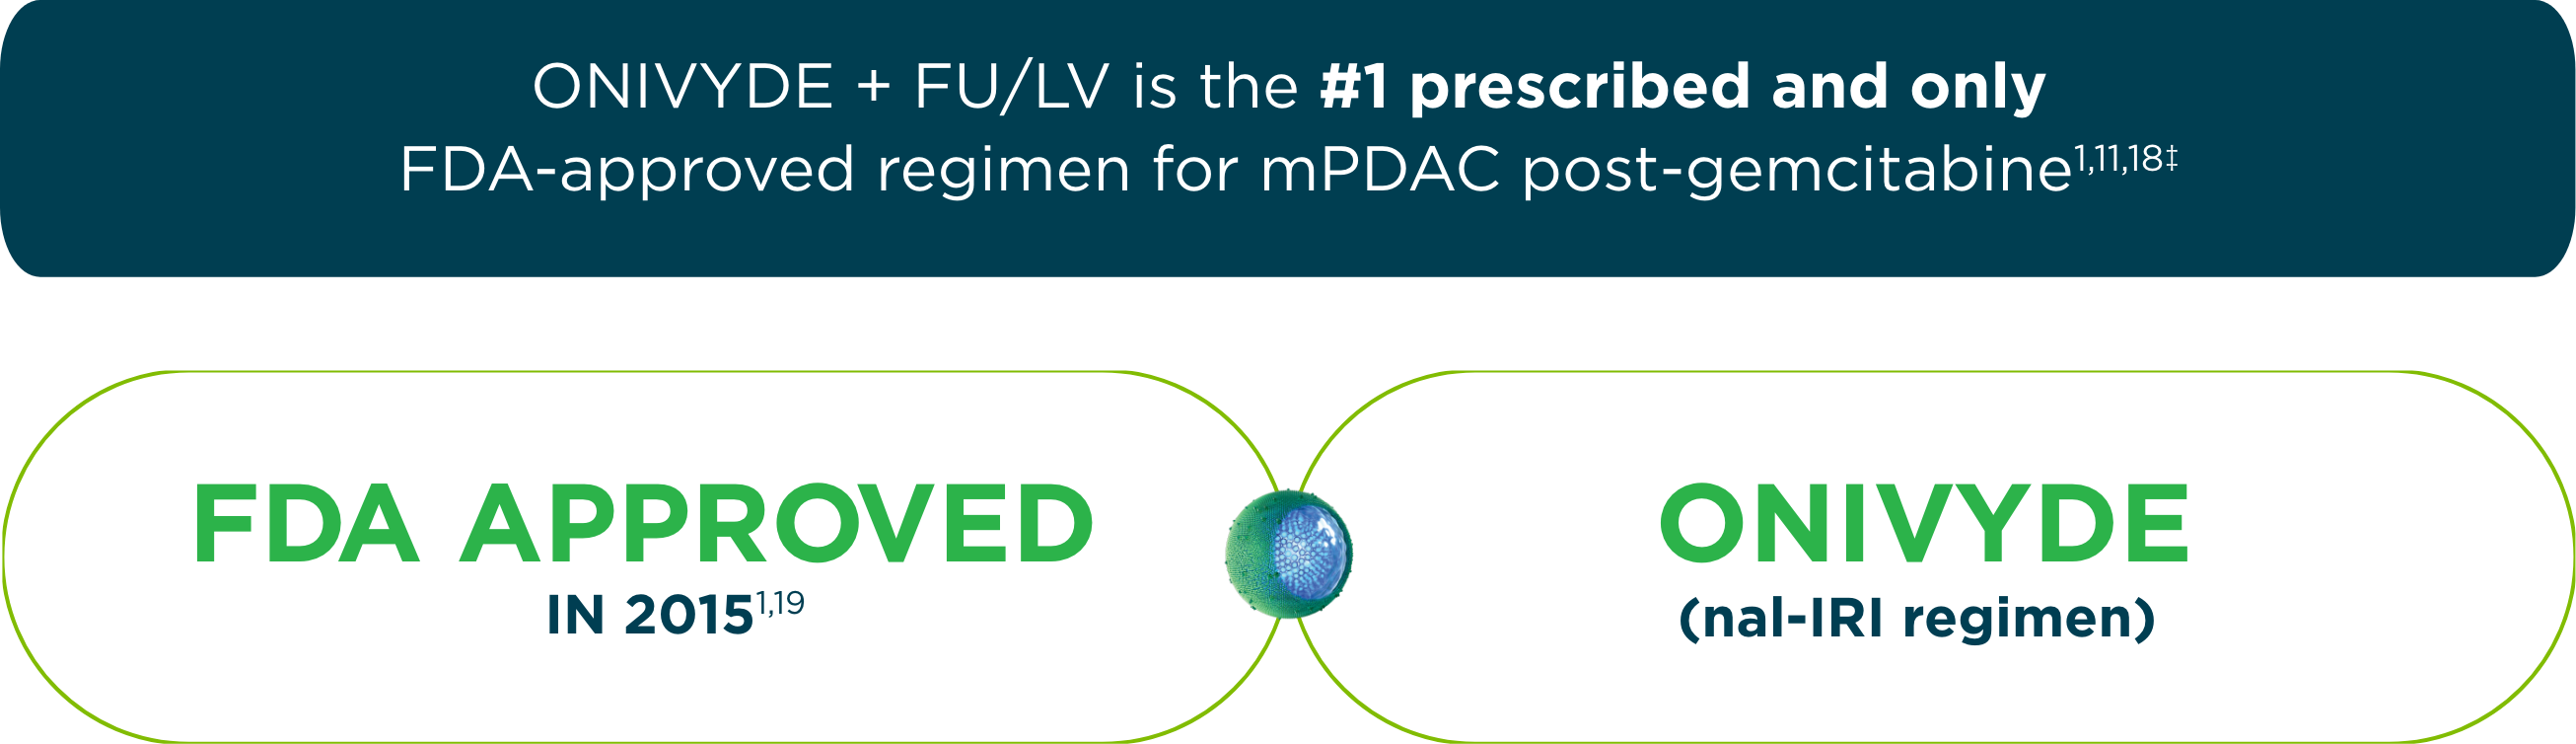 ONIVYDE® (irinotecan liposome injection) + FU/LV, FDA approved in 2015, is the #1 prescribed and only approved regimen for adult patients with metastatic pancreatic ductal adenocarcinoma after progression on gemcitabine.